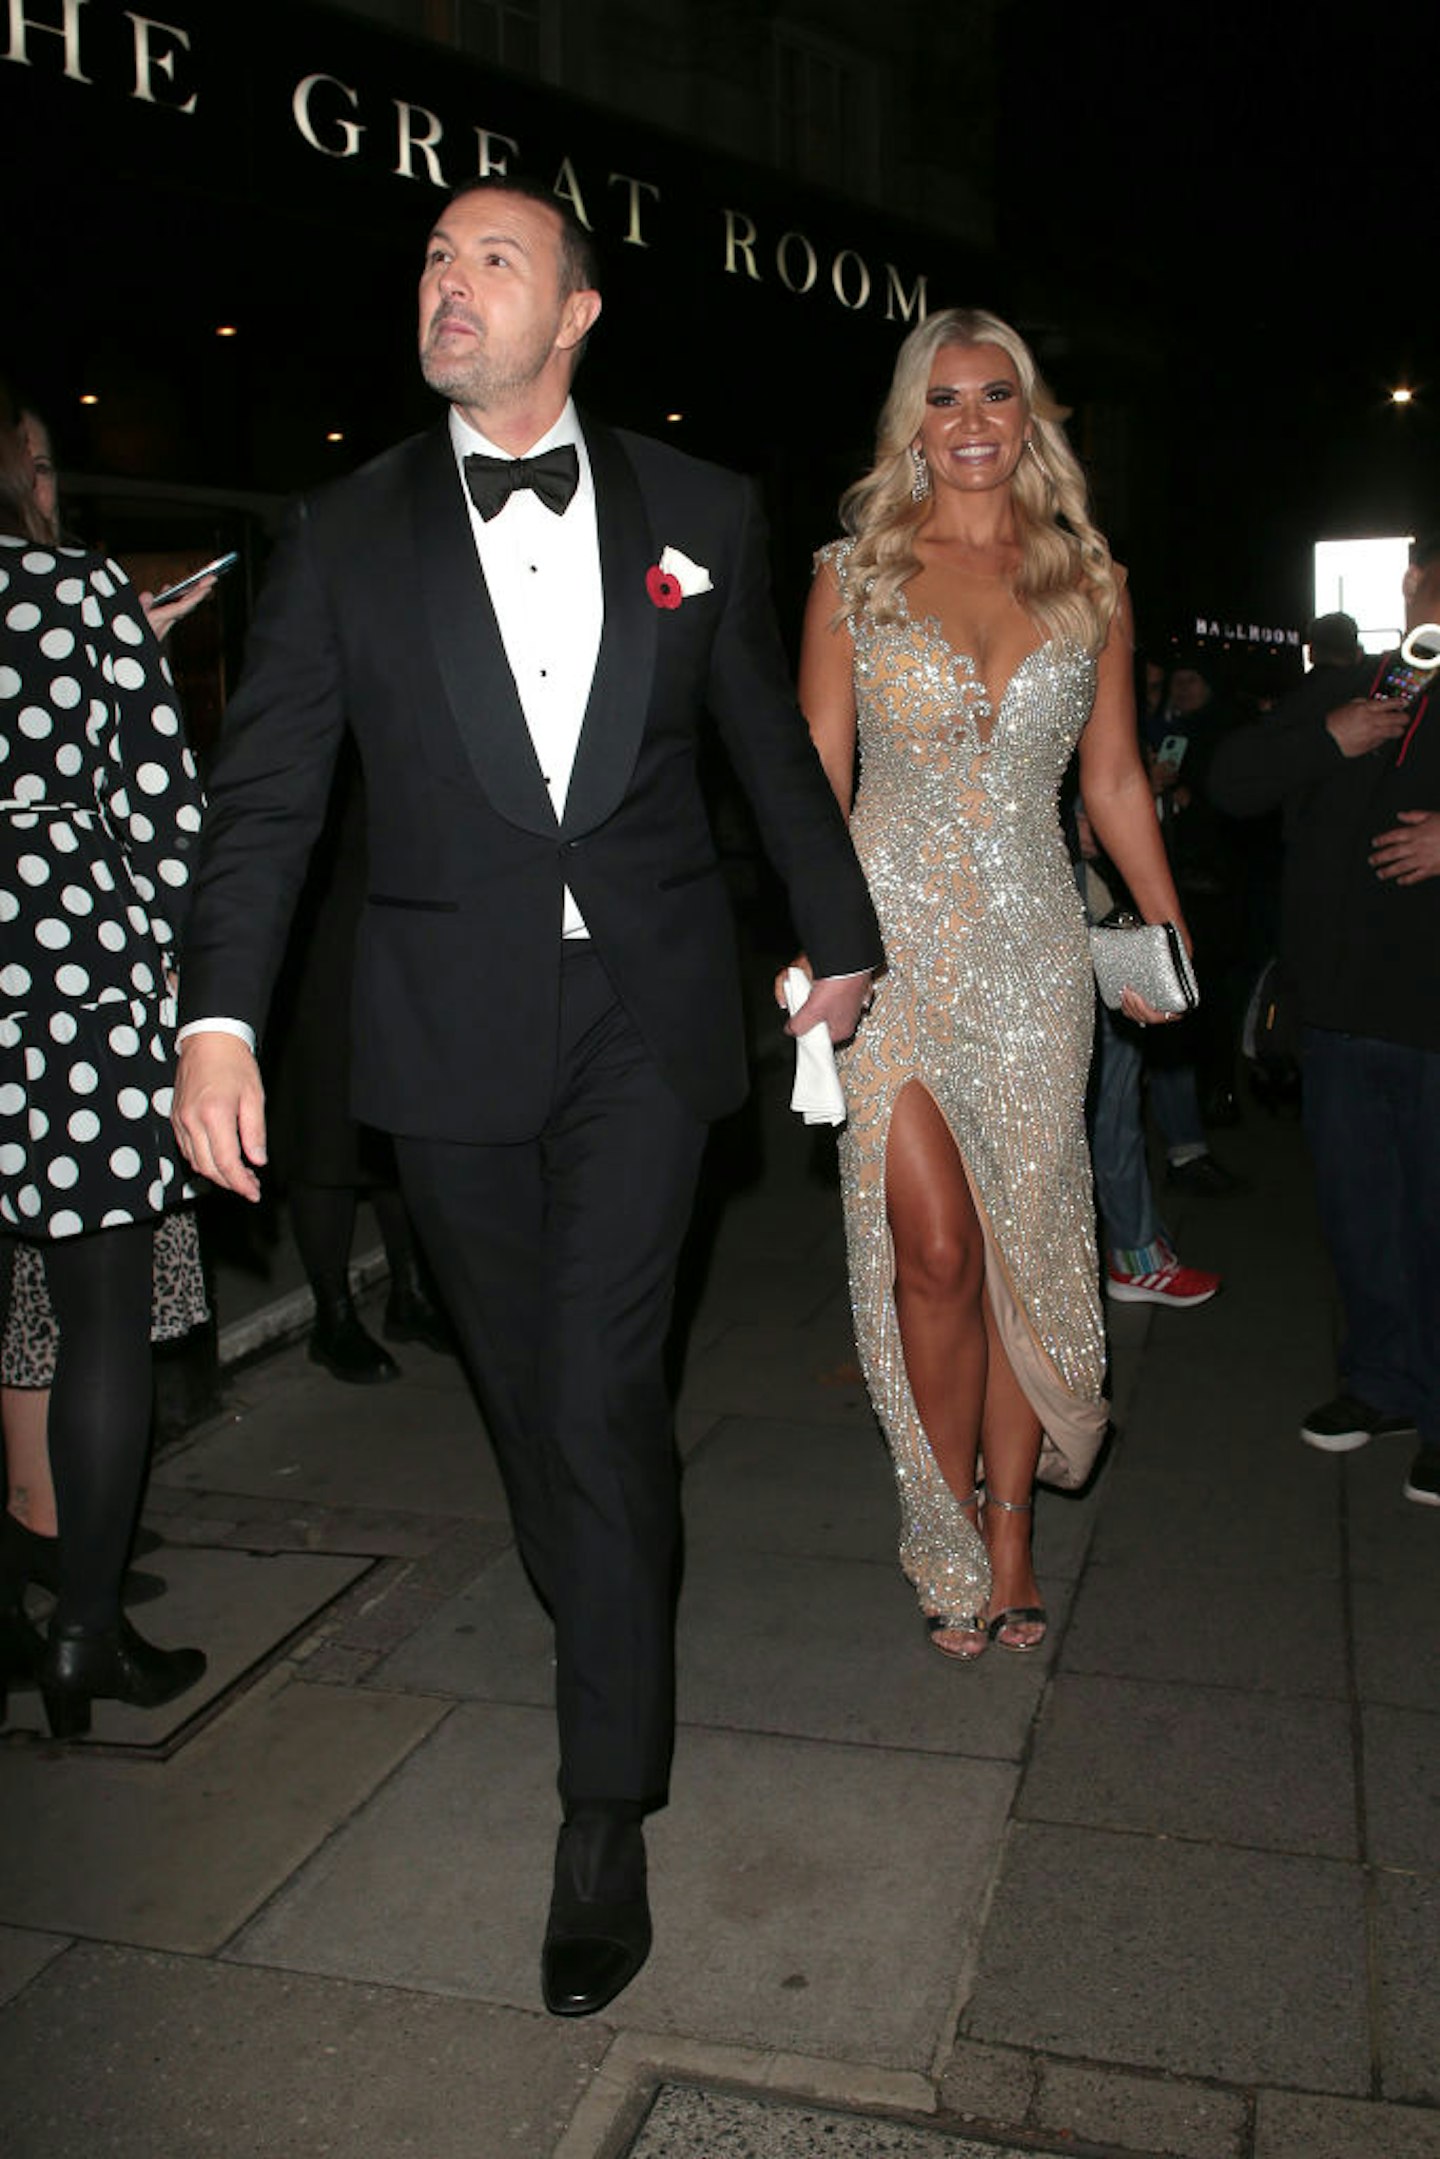 Christine McGuinness: 'I will spend the big day with Paddy’